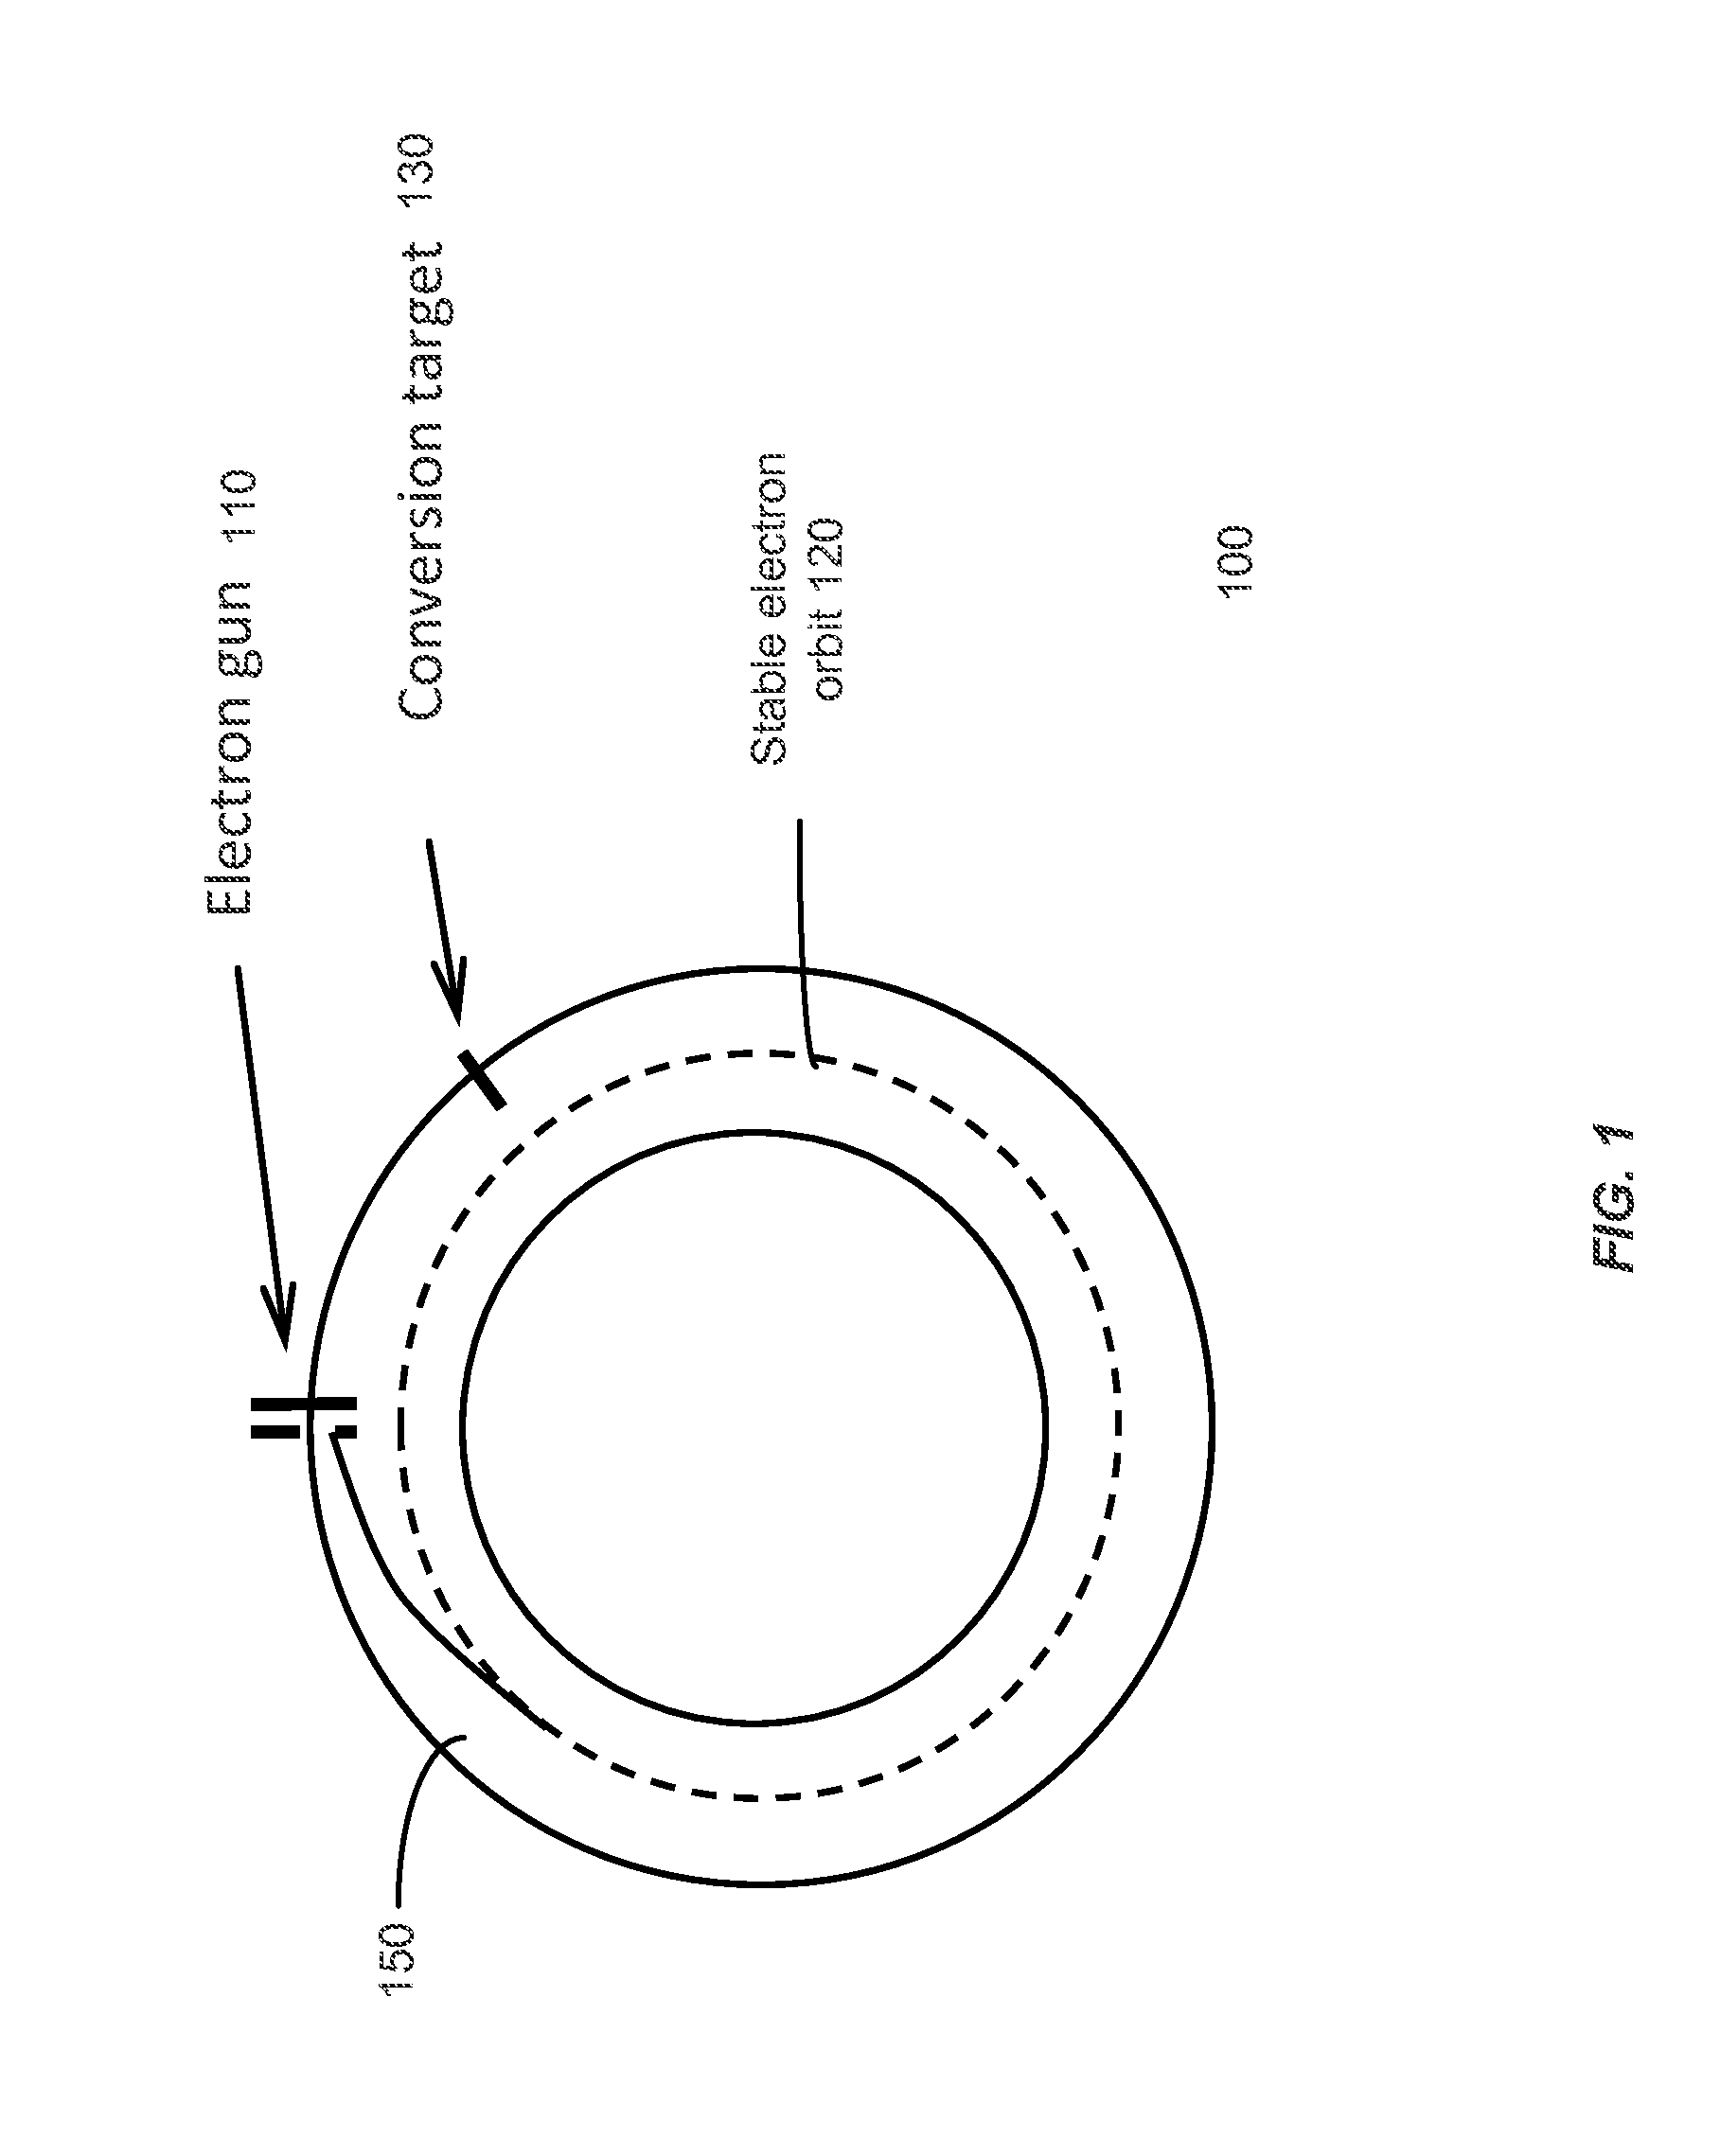 Interlaced multi-energy betatron with adjustable pulse repetition frequency